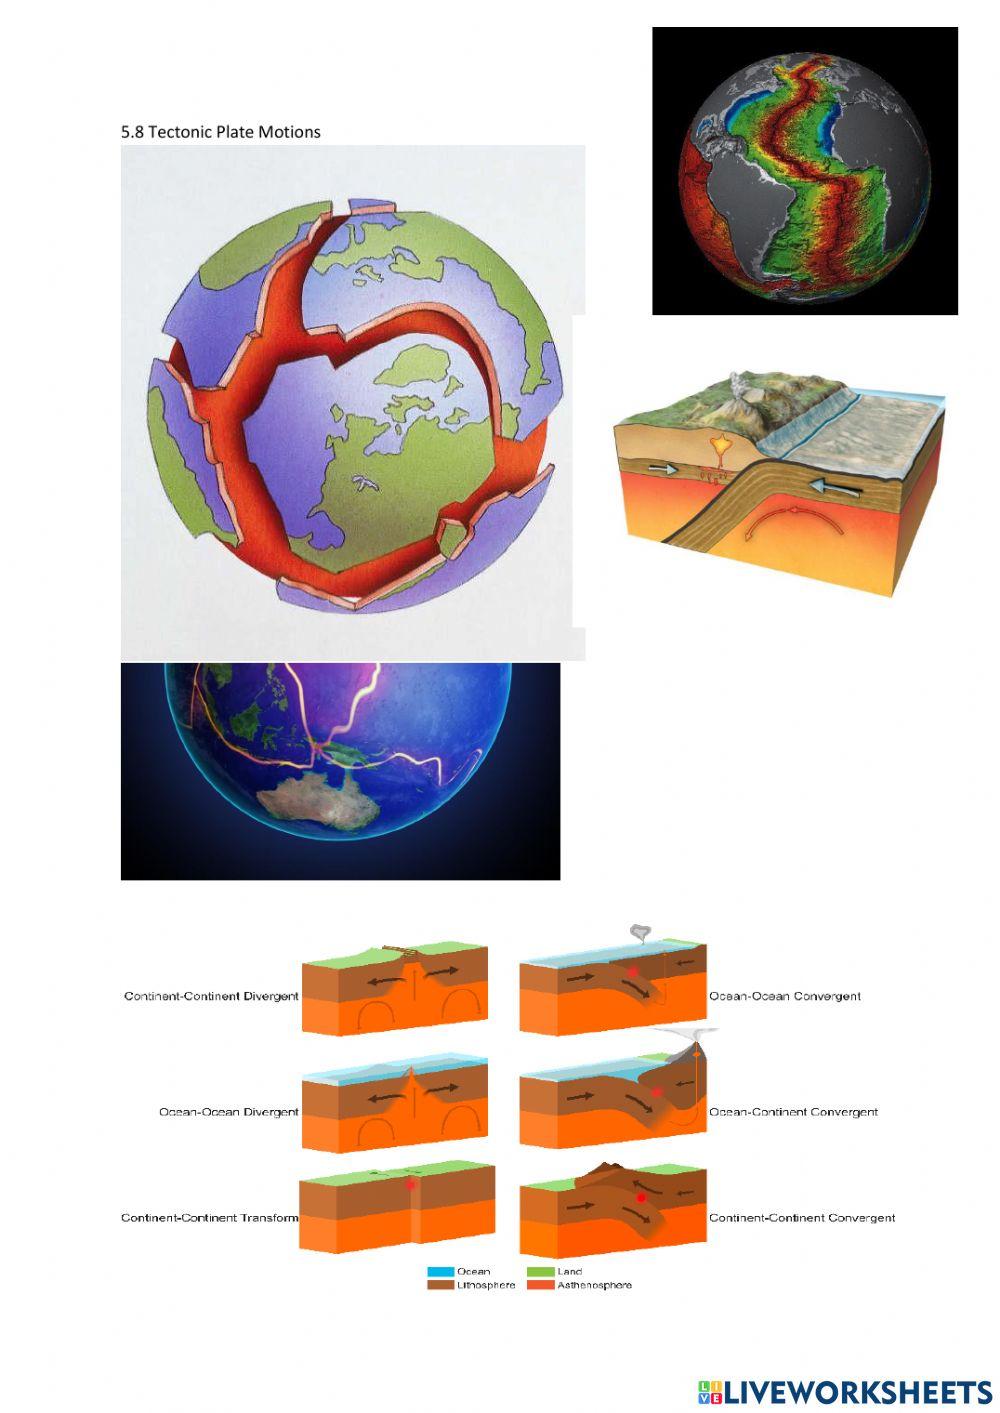 5.8 Tectonic Plate Motions